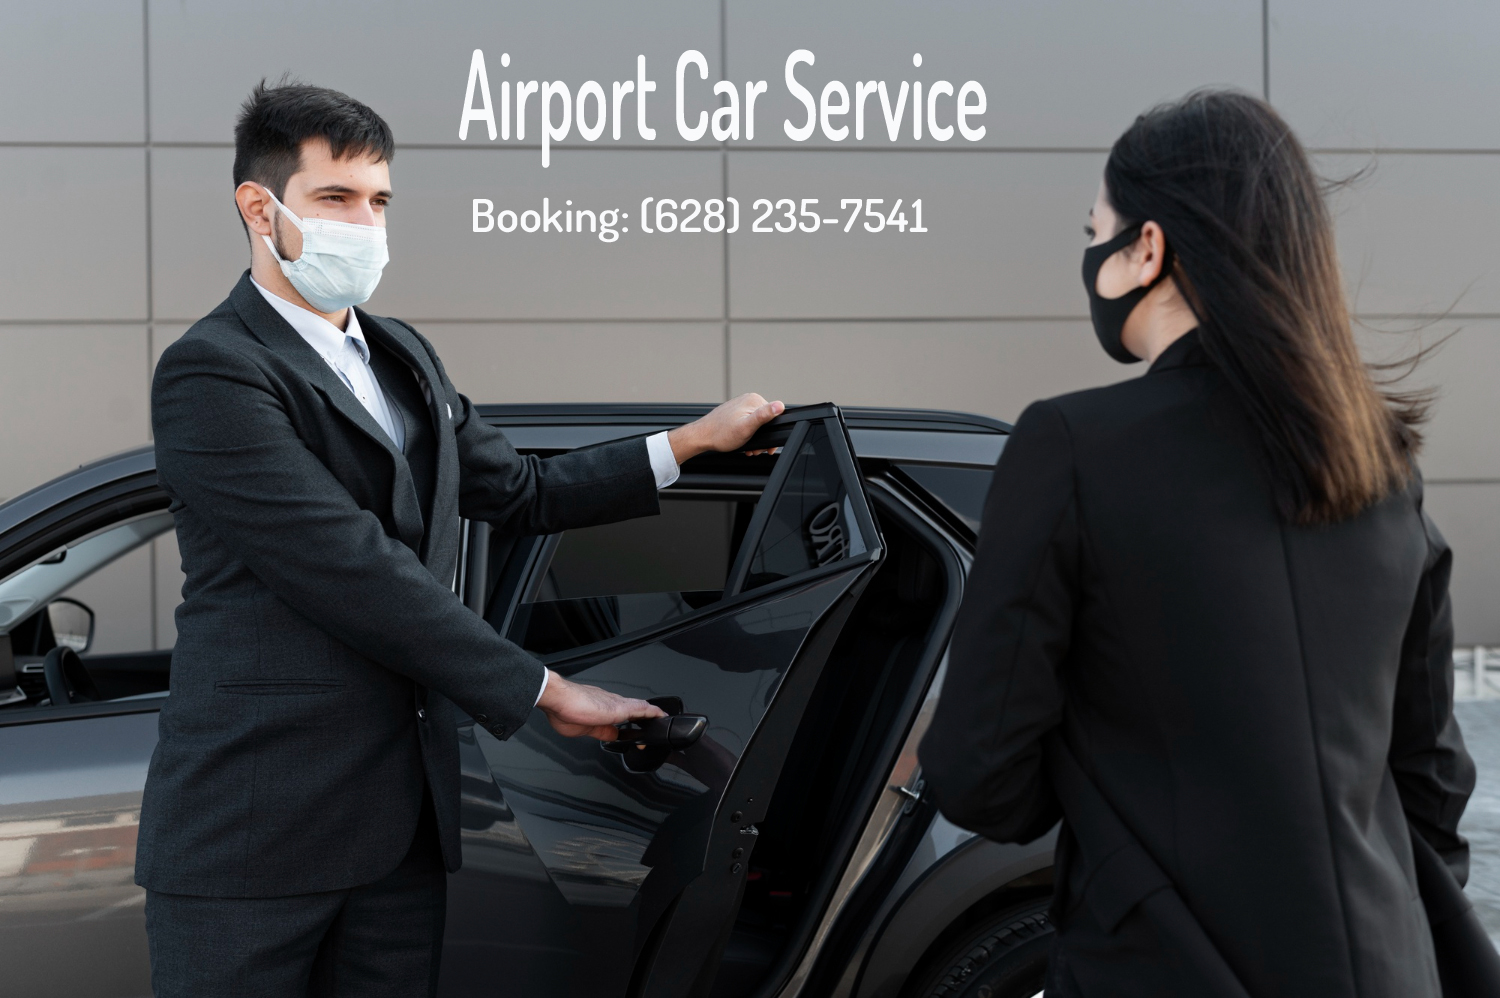 The One Airport Car Service Trick Every Person Should Know